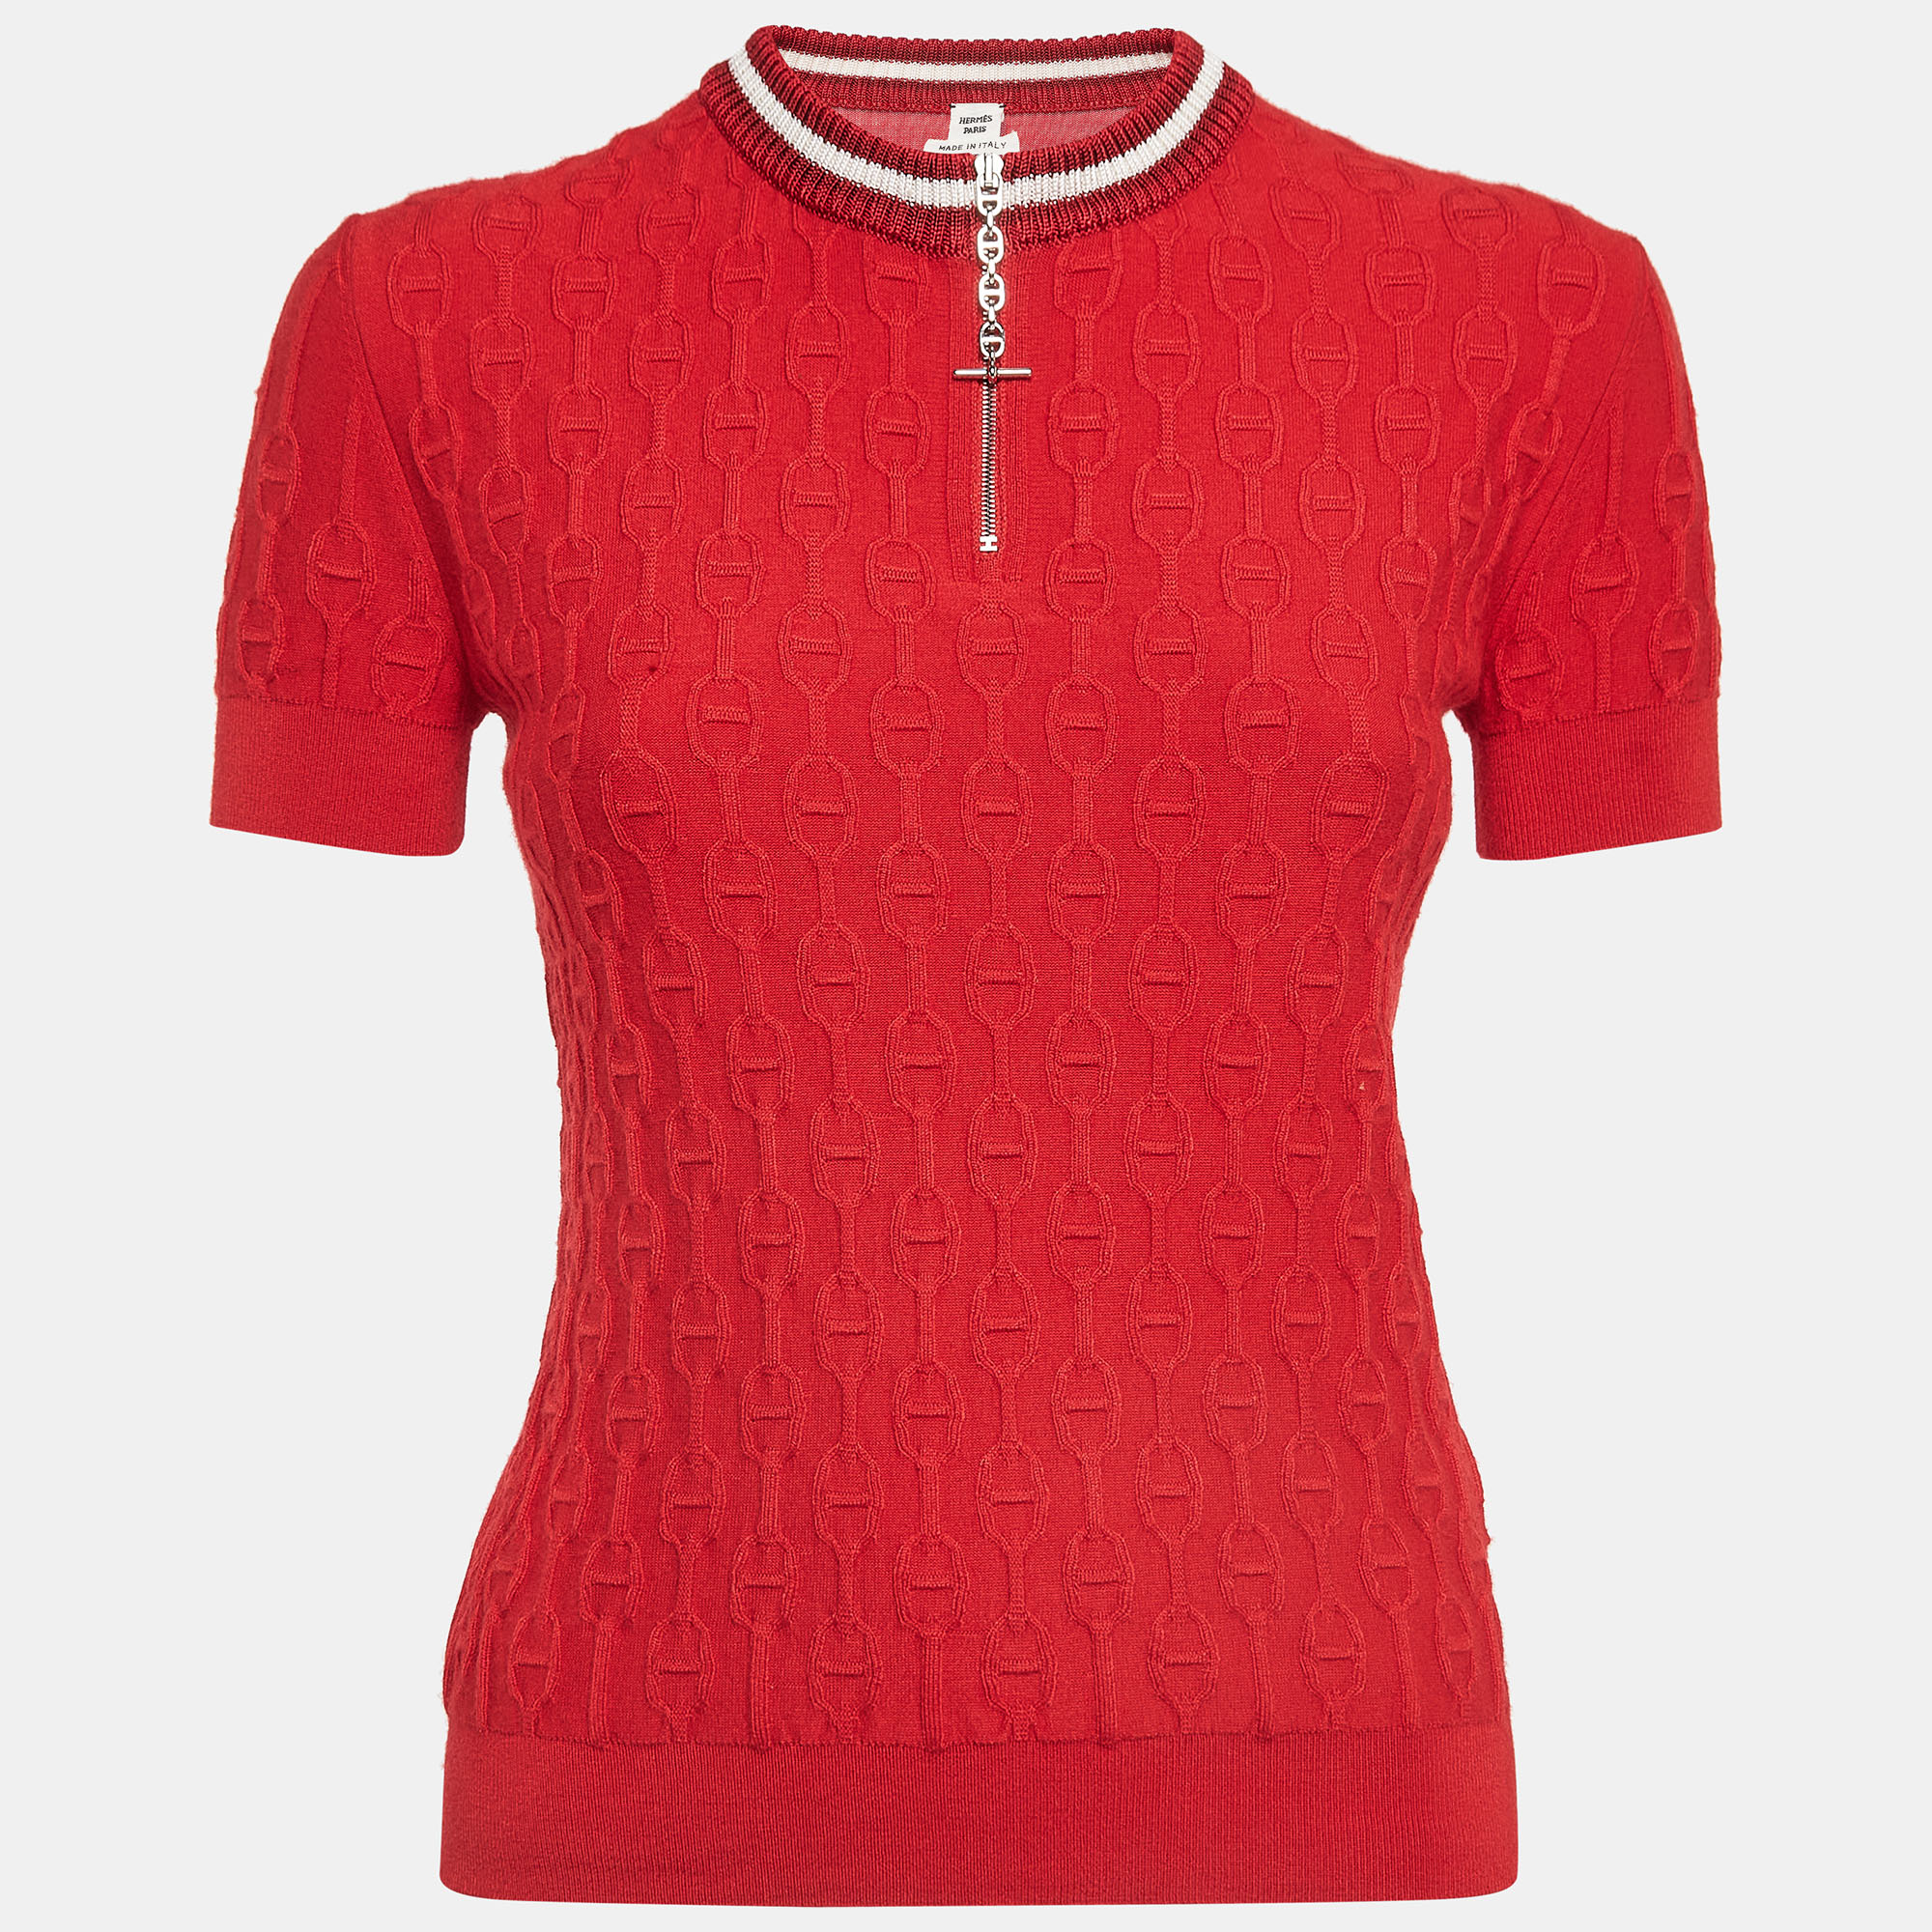 Hermes herm&egrave;s red textured knit  chaines d' ancre zipper top s